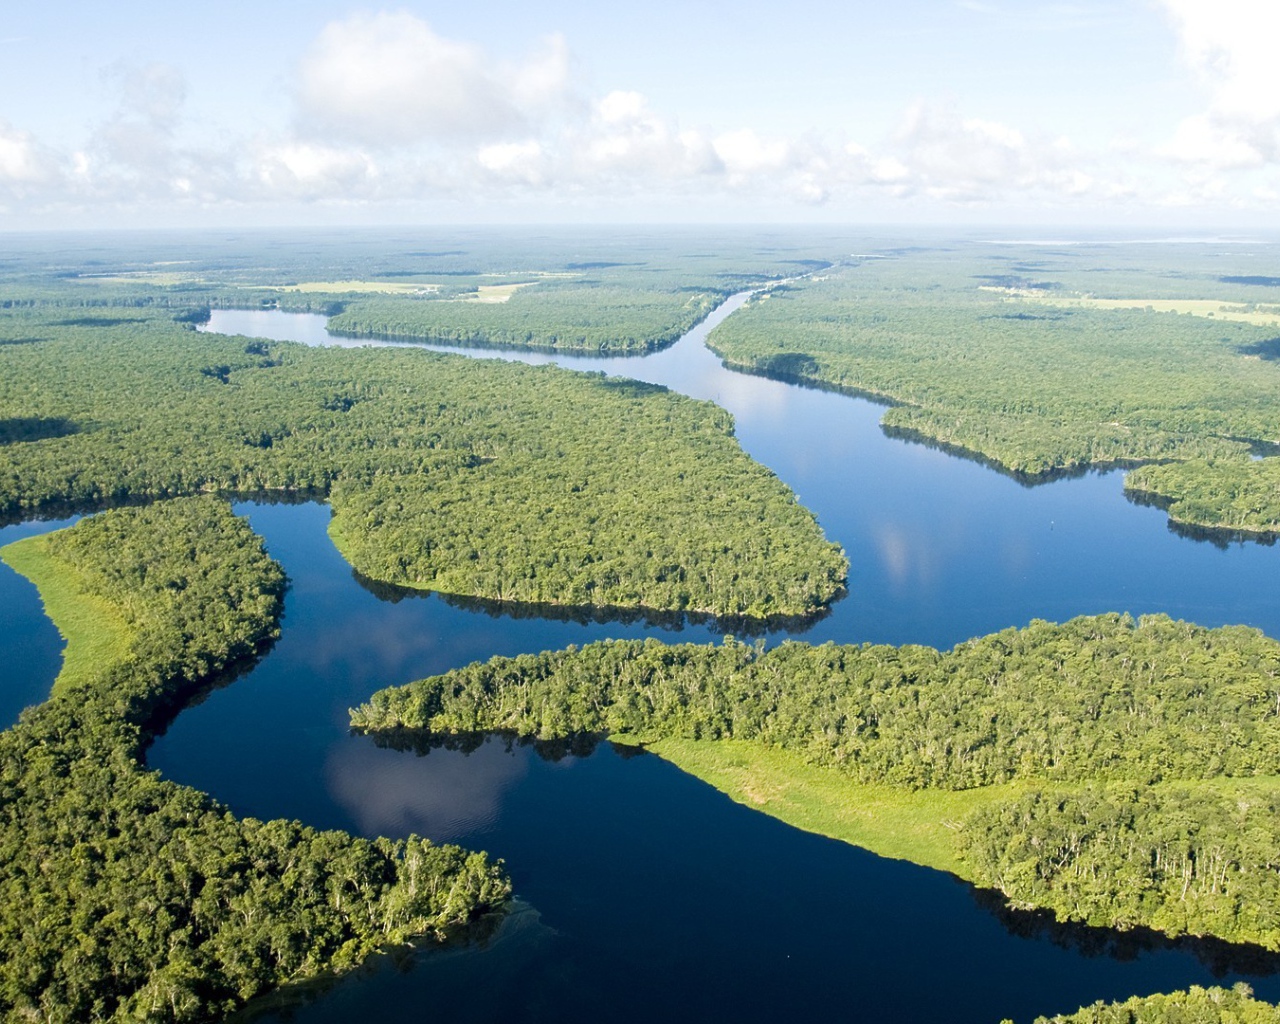 Dense forests on the Amazon River